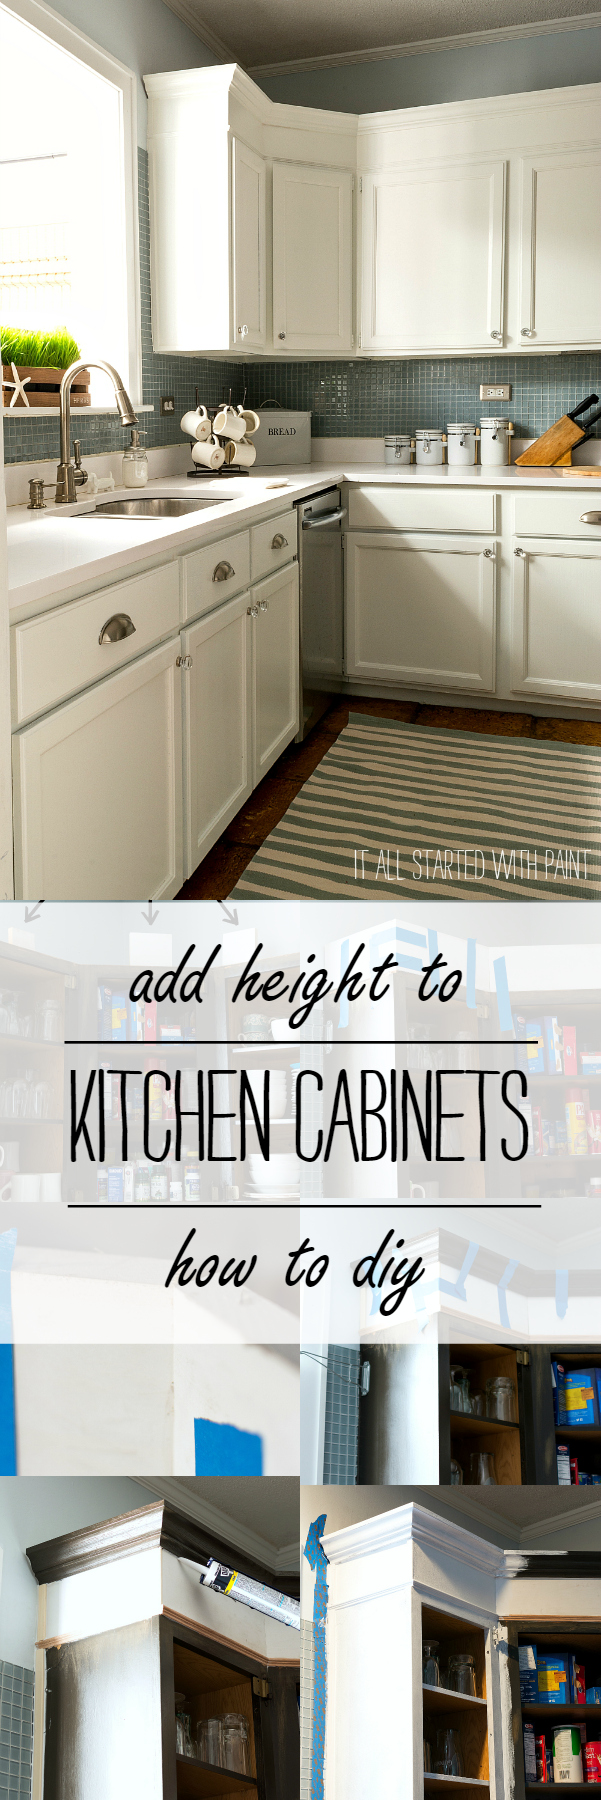 Easy Way to Add Height To Tops of Kitchen Cabinets Without Power Tools